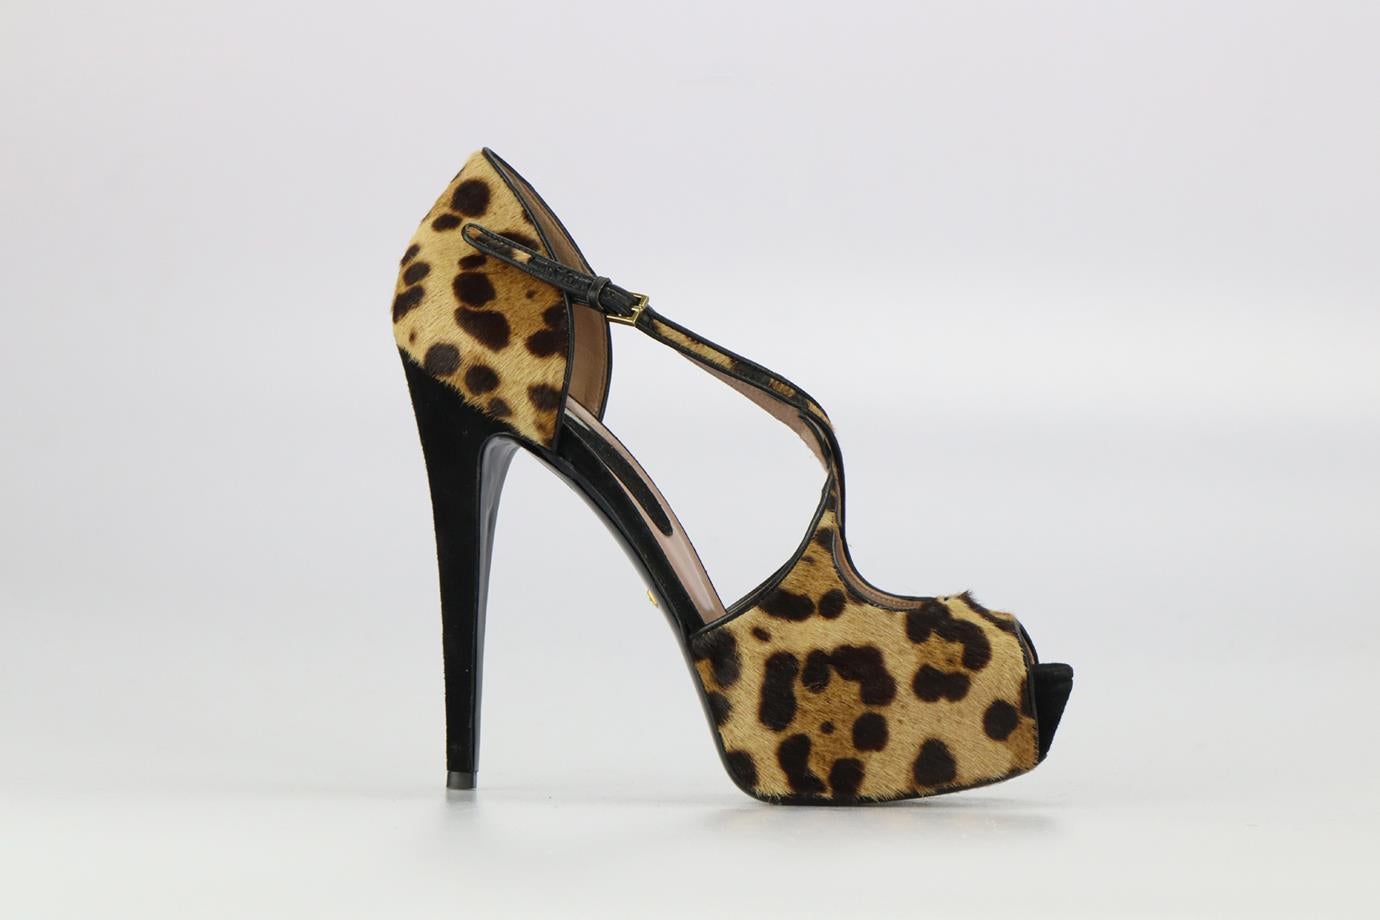 Gucci Leopard Print Calf Hair And Suede Platform Sandals. Brown and black. Buckle fastening - Side. Does not come with - dustbag or box. EU 40 (UK 7, US 10). Insole: 9.9 in. Heel height: 4.5 in. Platform: 1.3 in. Condition: Used. Very good condition